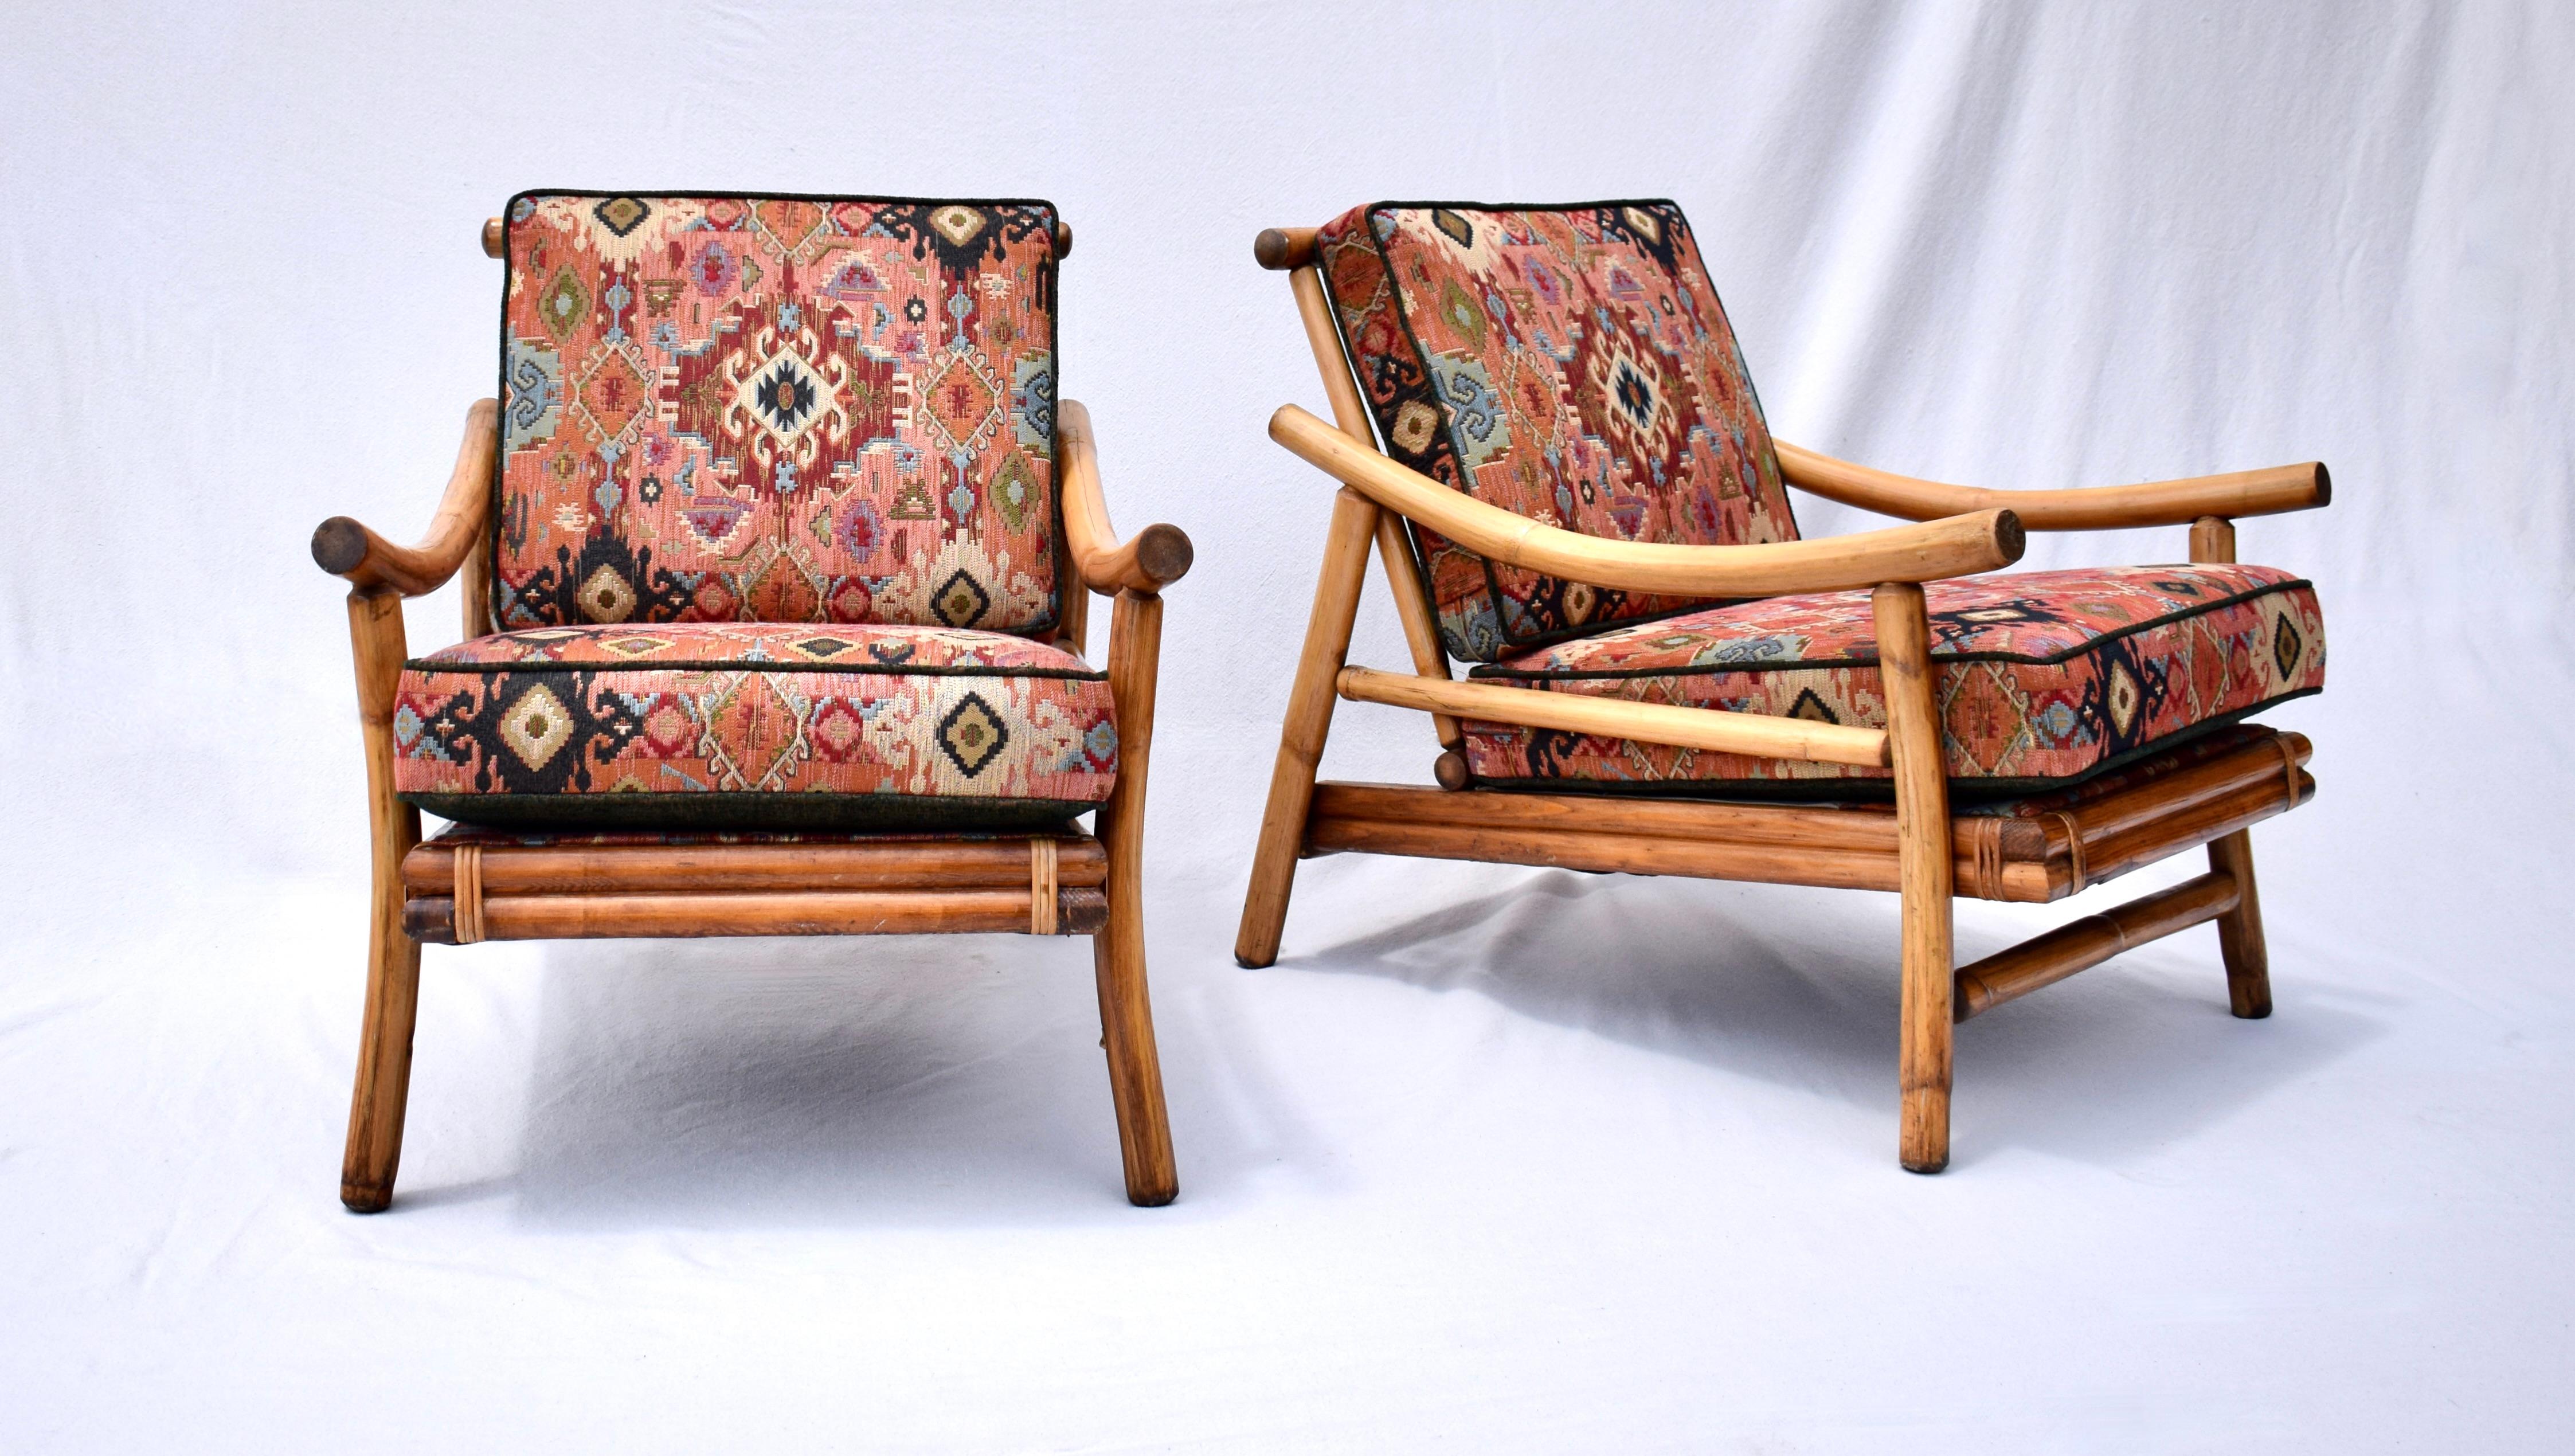 Ficks Reed Pagoda style lounge chairs & table set of rattan and raffia with hardwood seats and original spring construction. In marvelous vintage condition the set has been hand detailed throughout maintaining a warm lustered patina to the all